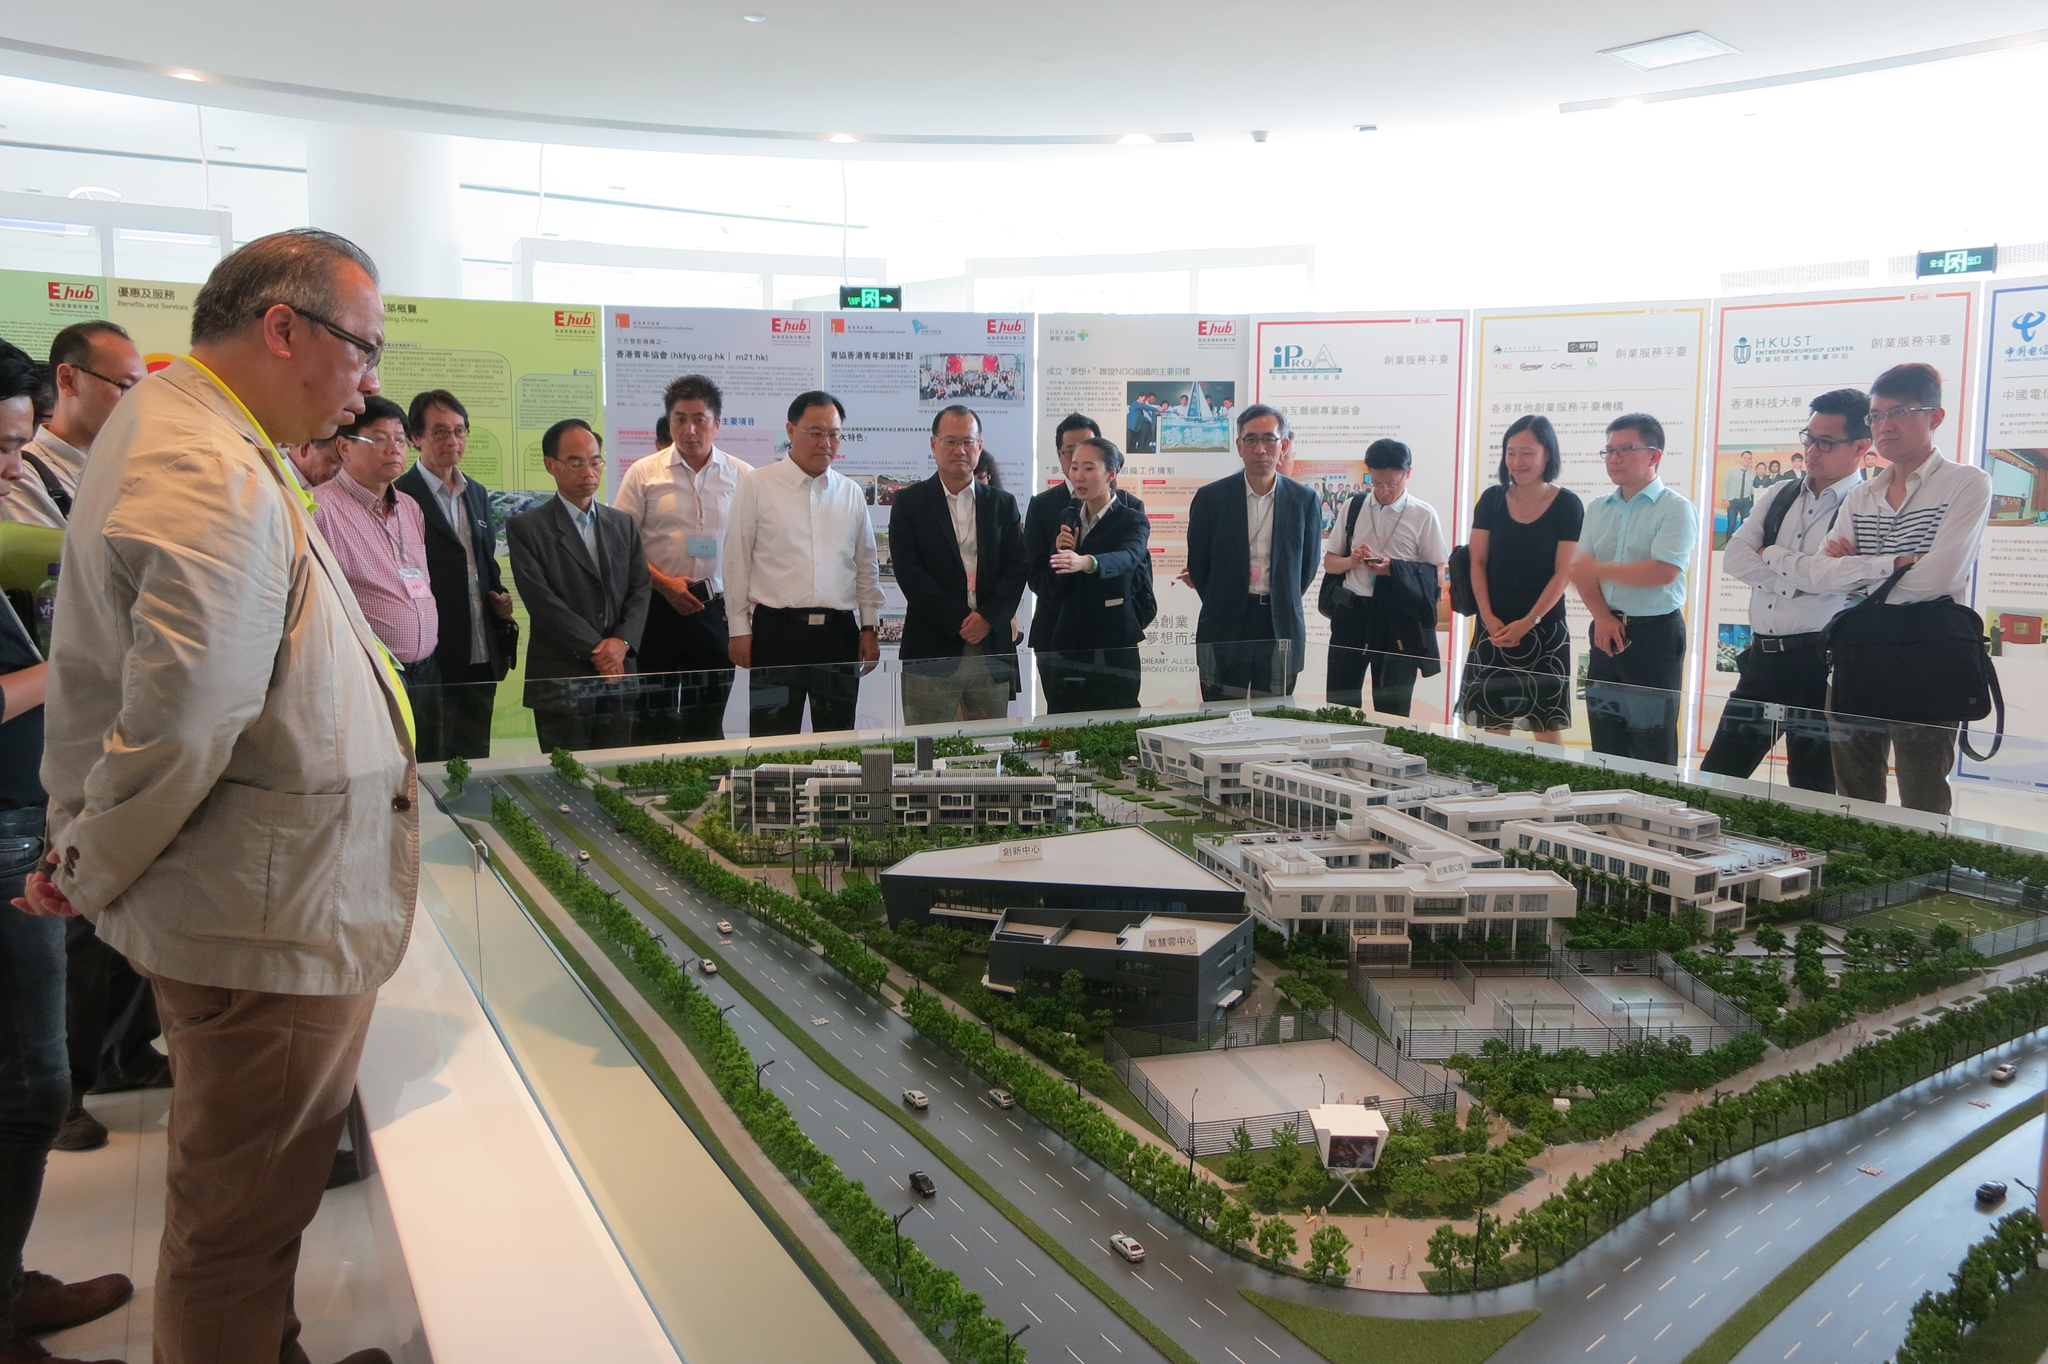 Photo 15 : The Small and Medium Enterprises Committee (SMEC) and the Guangdong Economic and Trade Office (GDETO) co-organised a Delegation visit to the "Qianhai Shenzhen-Hong Kong Modern Service Industry Cooperation Zone", and "Shekou Area of Shenzhen of the China (Guangdong) Pilot Free Trade Zone" on 7 September 2015.  The Delegation was led by the SMEC Chairman Dr Johnathan CHOI, Director-General of Trade and Industry, and Director of GDETO.  There were over 50 participants coming from the SMEC, major Hong Kong Chambers of Commerce and SME associations.  The Delegation was received by the Qianhai Authority and the authority of the "Shekou Area of Shenzhen of the China (Guangdong) Pilot Free Trade Zone".  It visited the Qianhai Exhibition Hall, Qianhai Enterprise Dream Park and the Shekou Network Valley.  Participants also had an exchange with representatives of the Qianhai Authority to understand the latest development and business opportunities of Qianhai, and experiences of Hong Kong enterprises in developing these businesses in Qianhai.